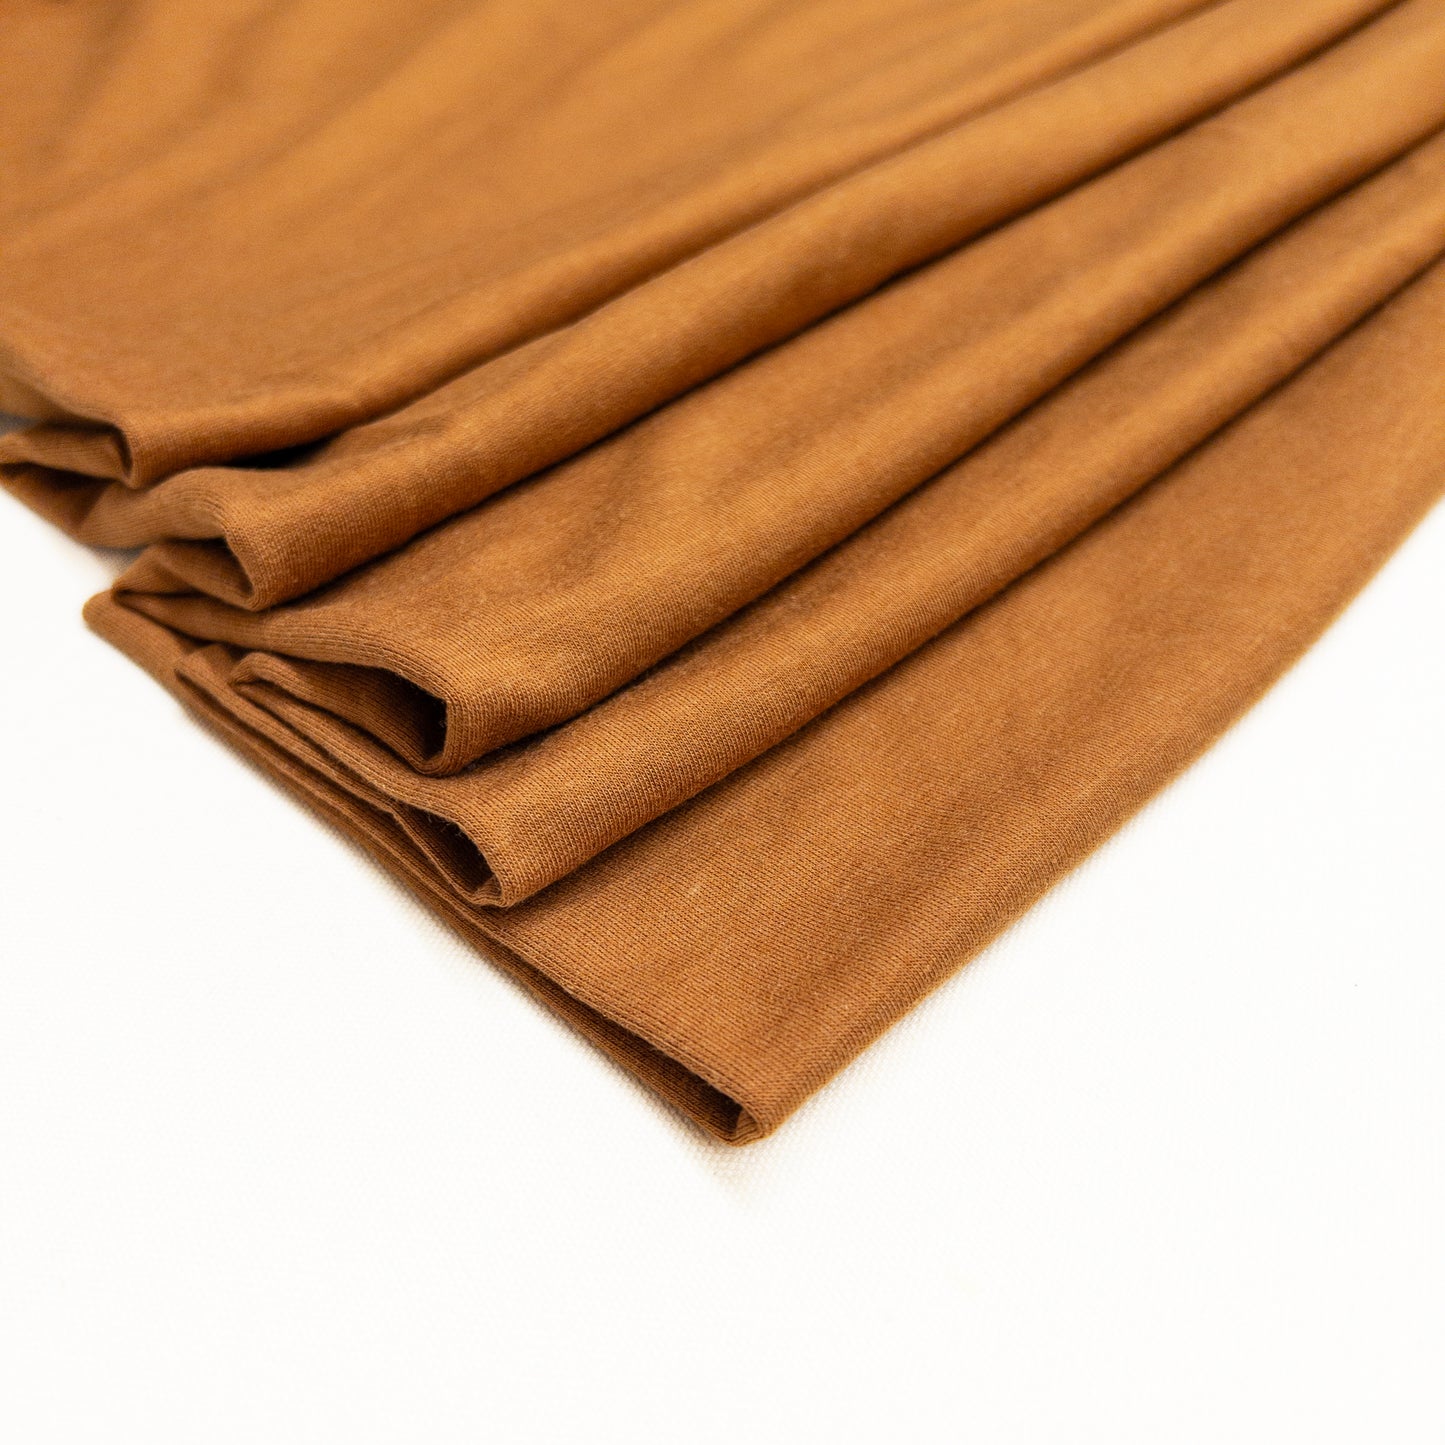 Bamboo/ Cotton French Terry in Teak